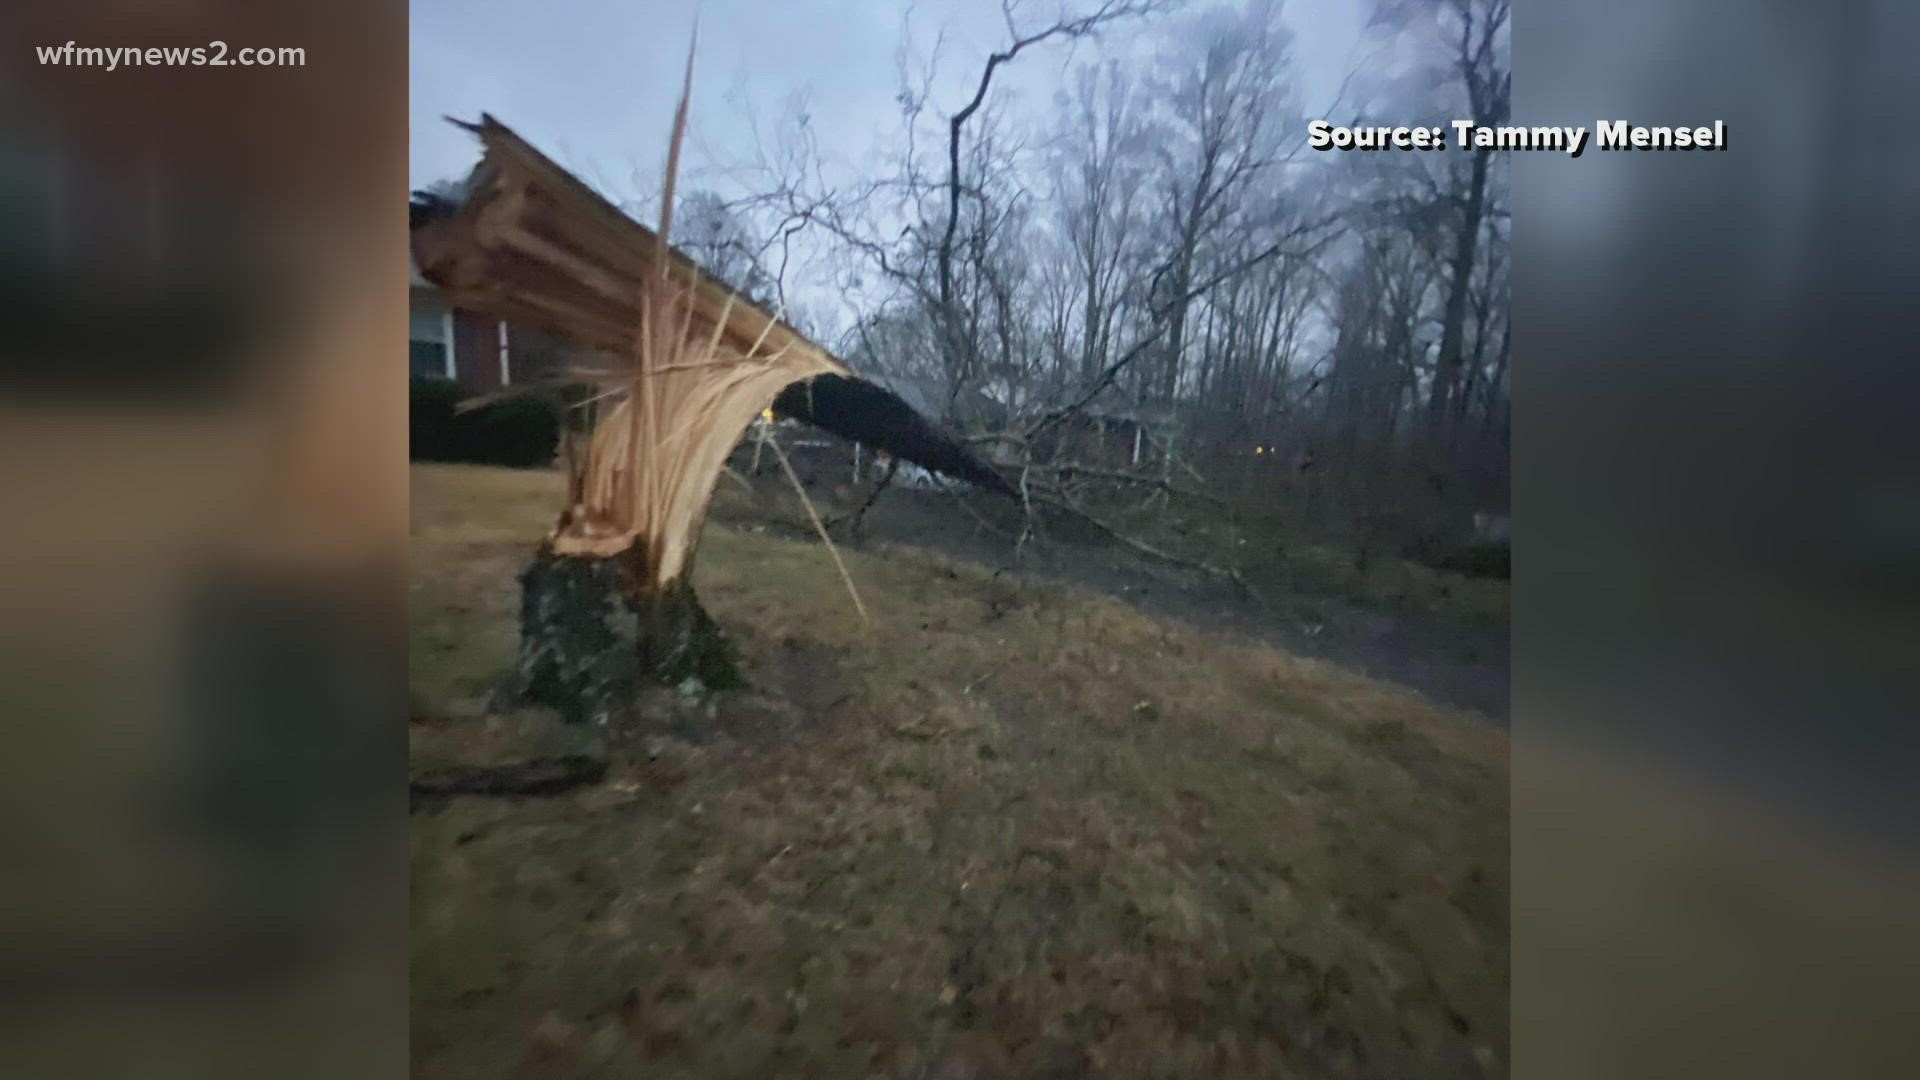 One Archdale family had to stay in a hotel after a tree fell on their home.